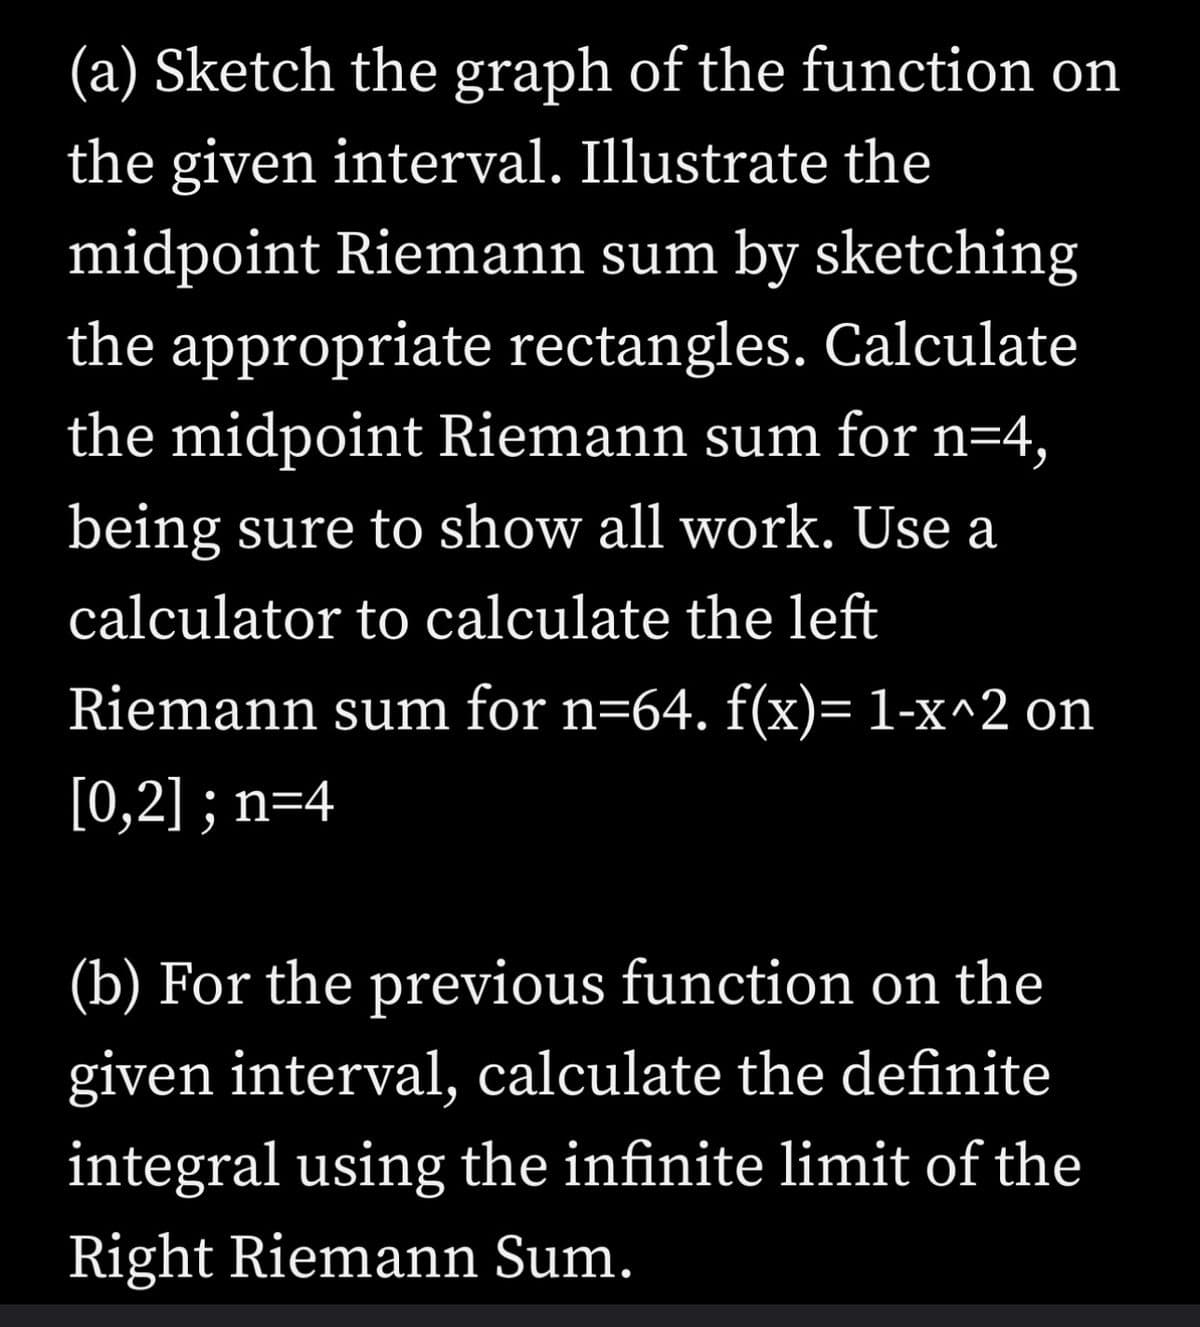 (a) Sketch the graph of the function on
the given interval. Illustrate the
midpoint Riemann sum by sketching
the appropriate rectangles. Calculate
the midpoint Riemann sum for n=4,
being sure to show all work. Use a
calculator to calculate the left
Riemann sum for n=64. f(x)= 1-x^2 on
[0,2] ; n=4
(b) For the previous function on the
given interval, calculate the definite
integral using the infinite limit of the
Right Riemann Sum.